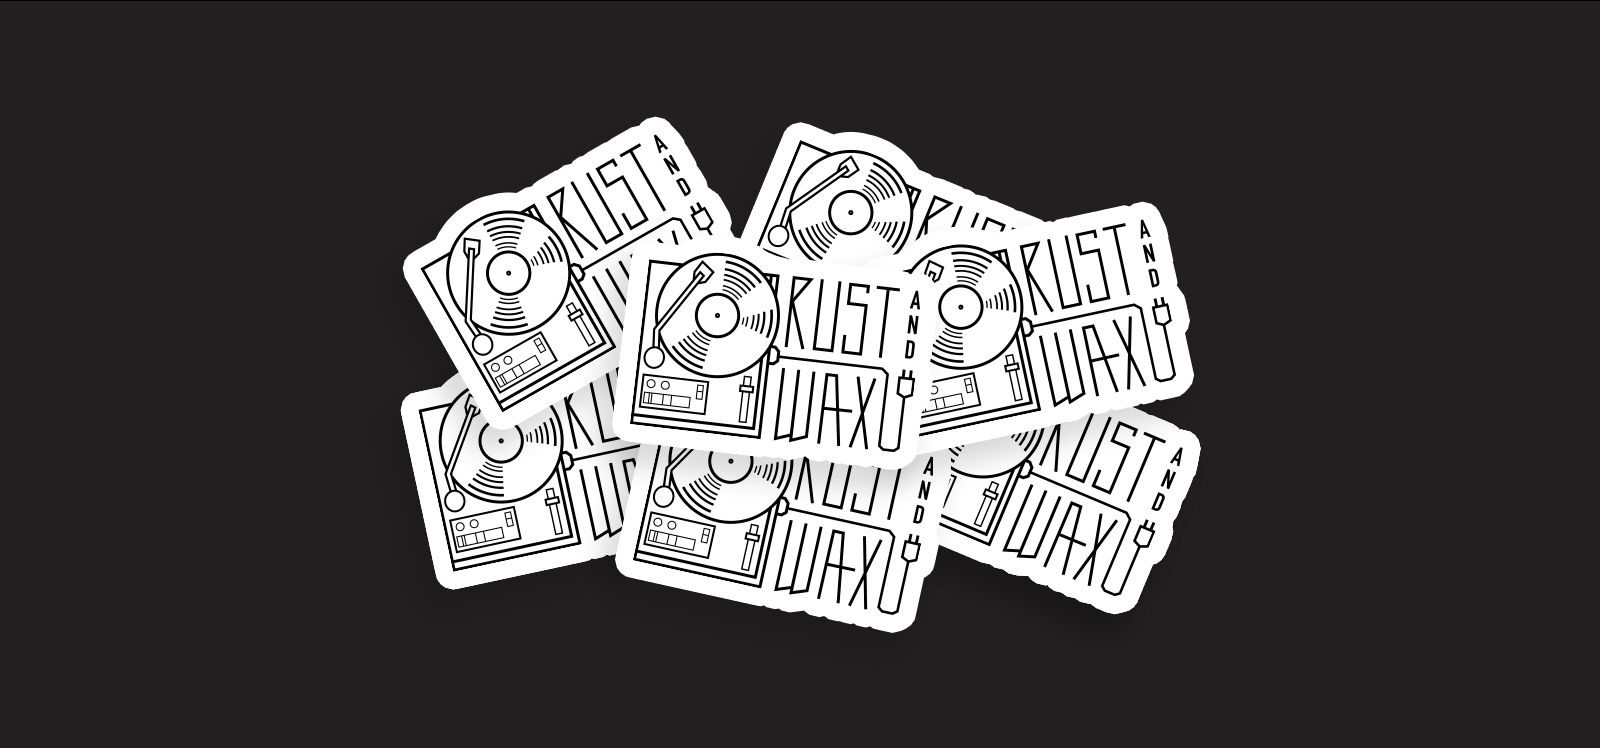 Black & white sticker mockups of a minimal linework illustrated record player and "Rust & Wax" in a custom lettering.